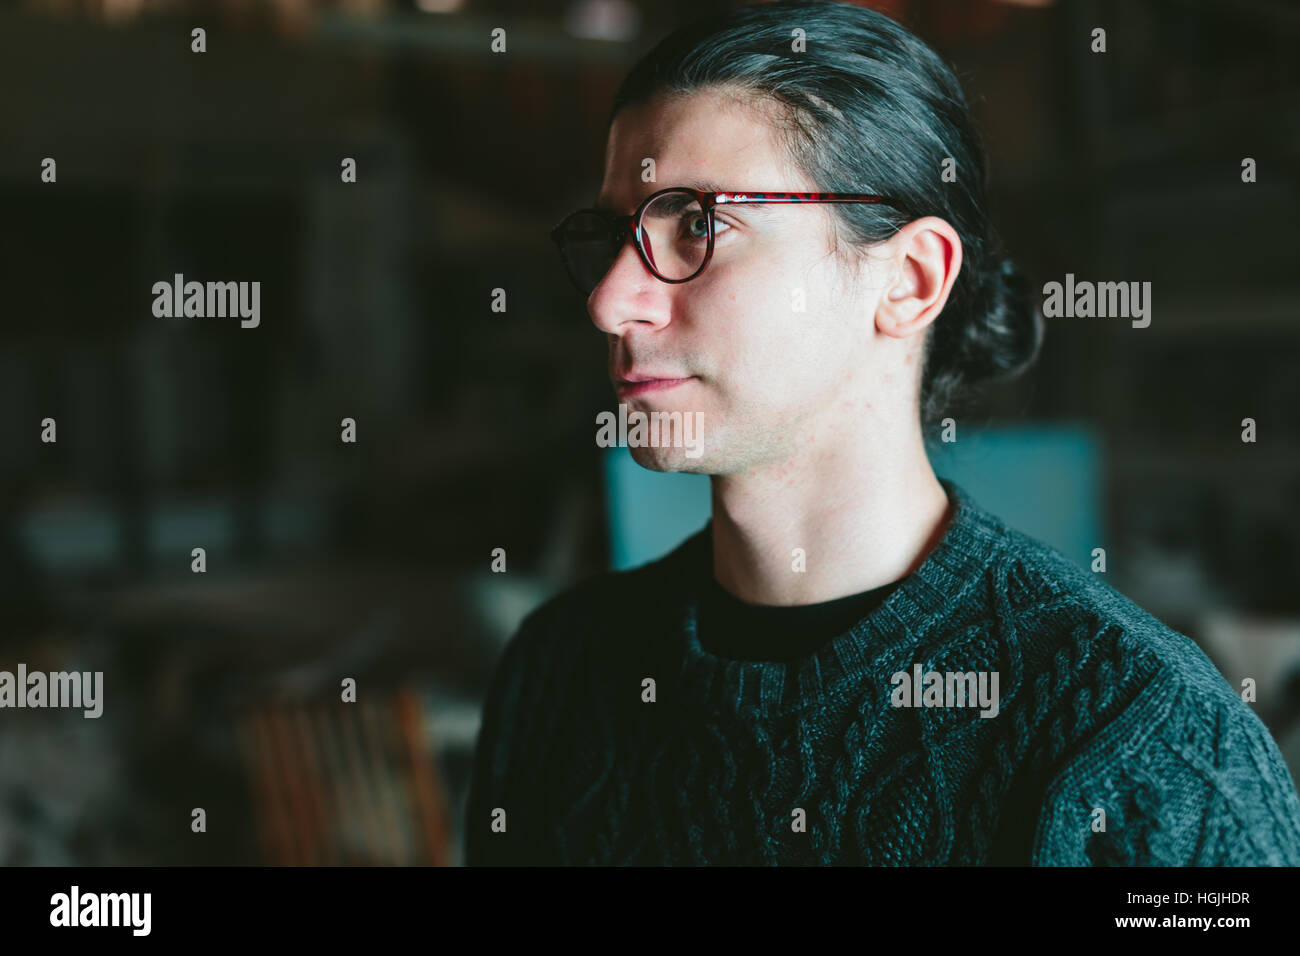 young handsome guy with glasses on a dark background Stock Photo